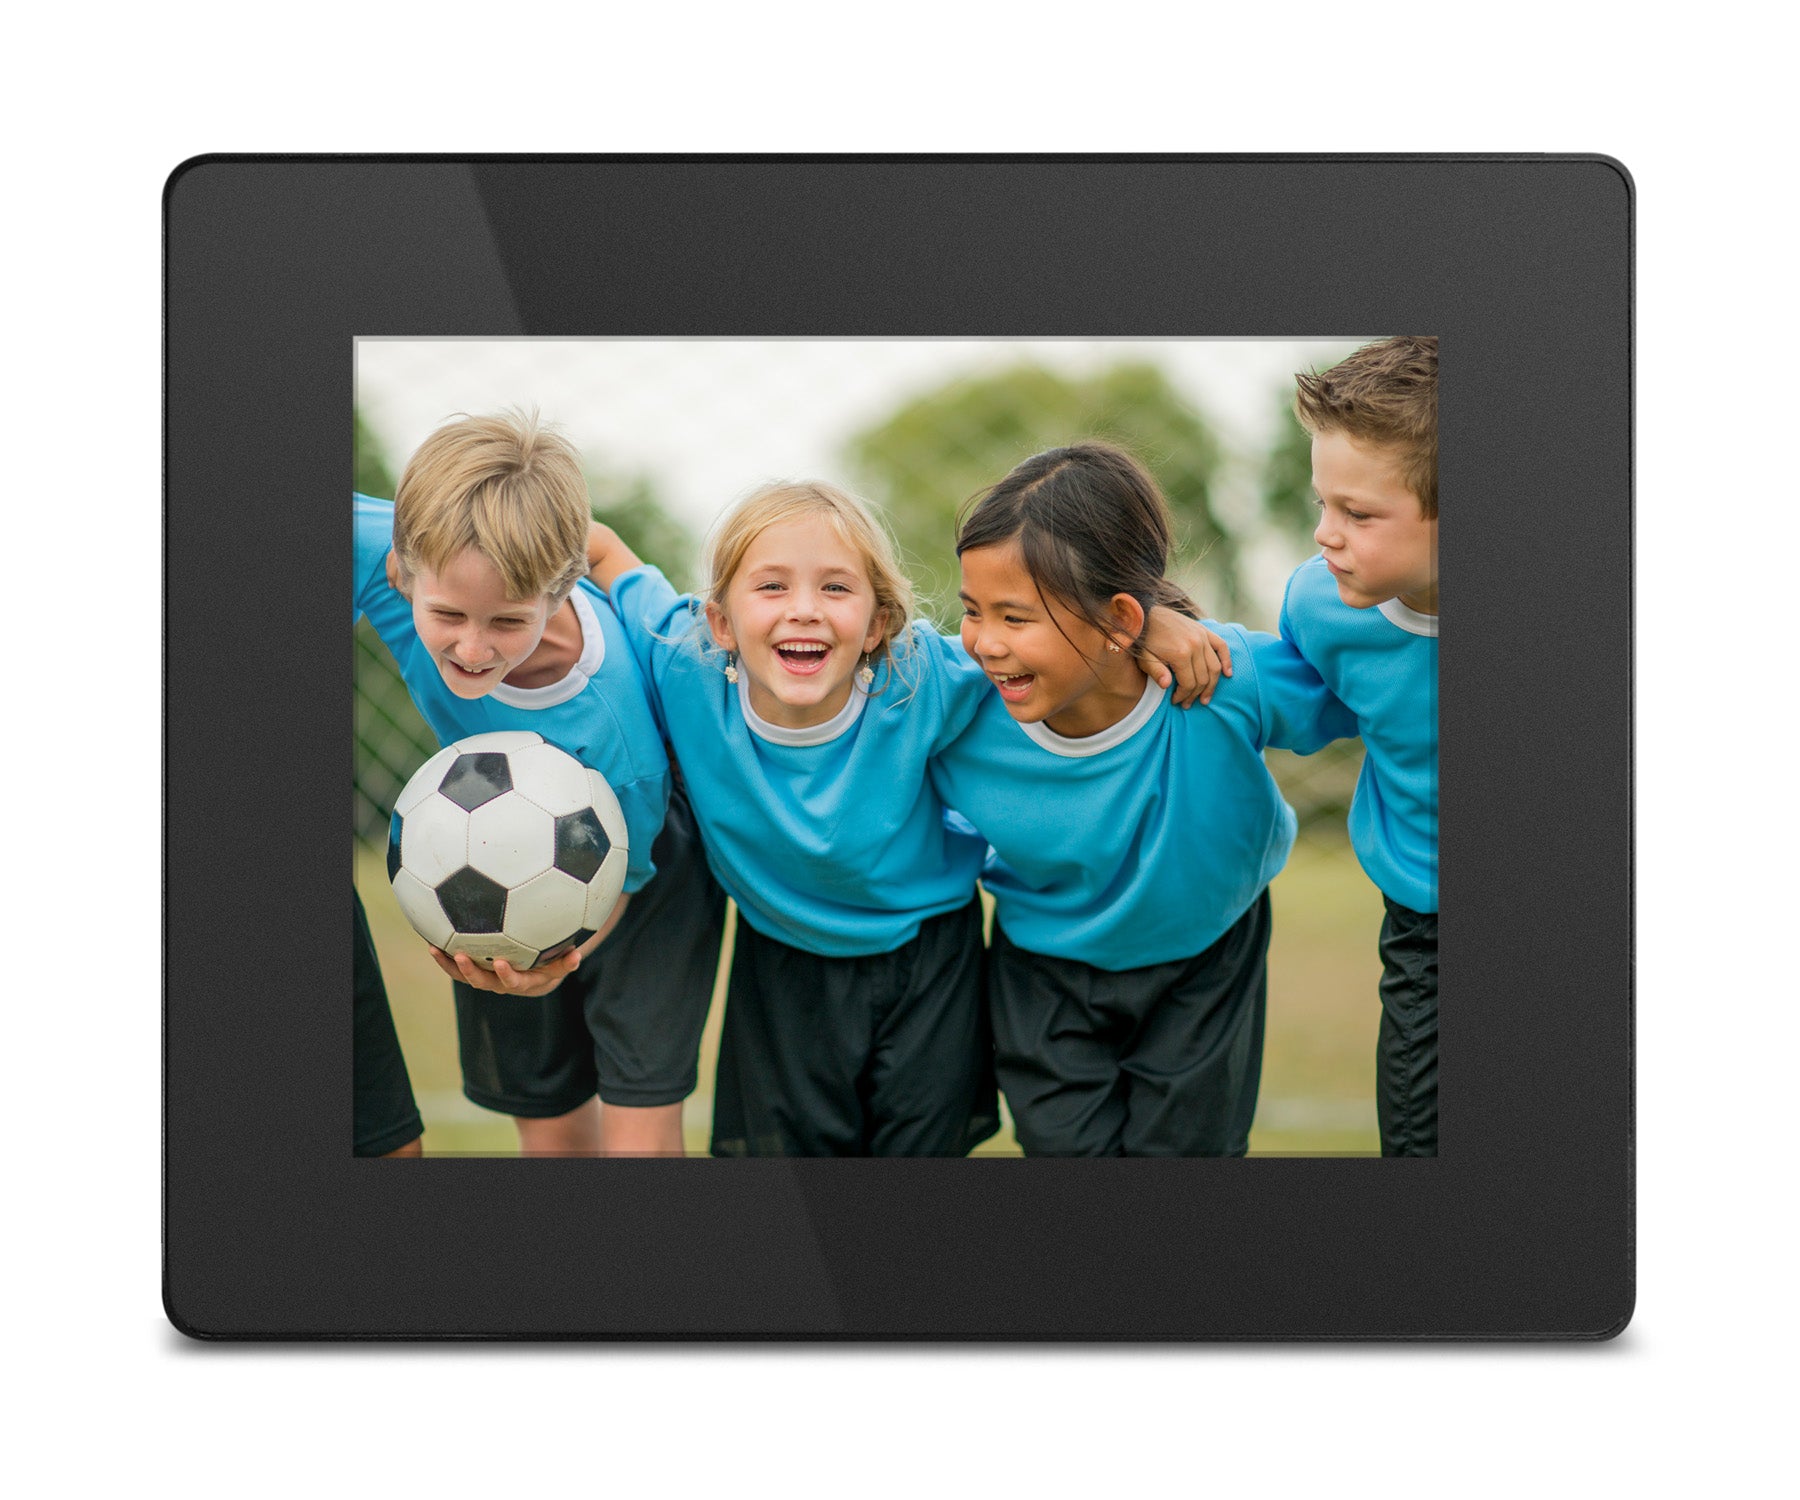 WiFi Digital Photo Frame with Touchscreen IPS LCD Display and 16GB Built-in Memory - 8 inch